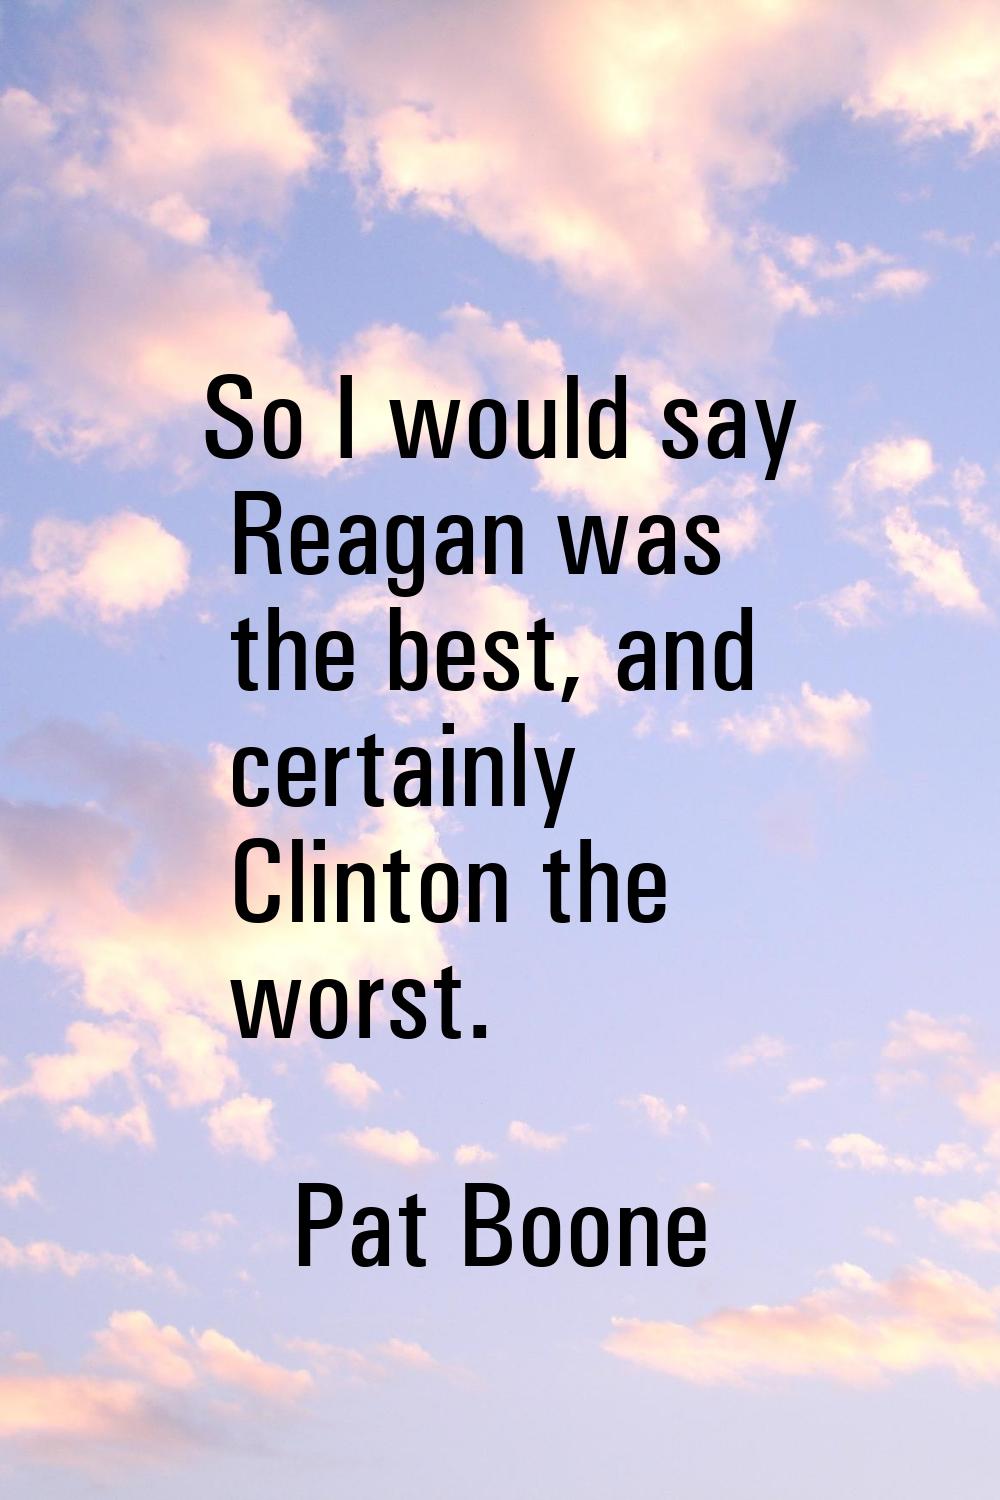 So I would say Reagan was the best, and certainly Clinton the worst.